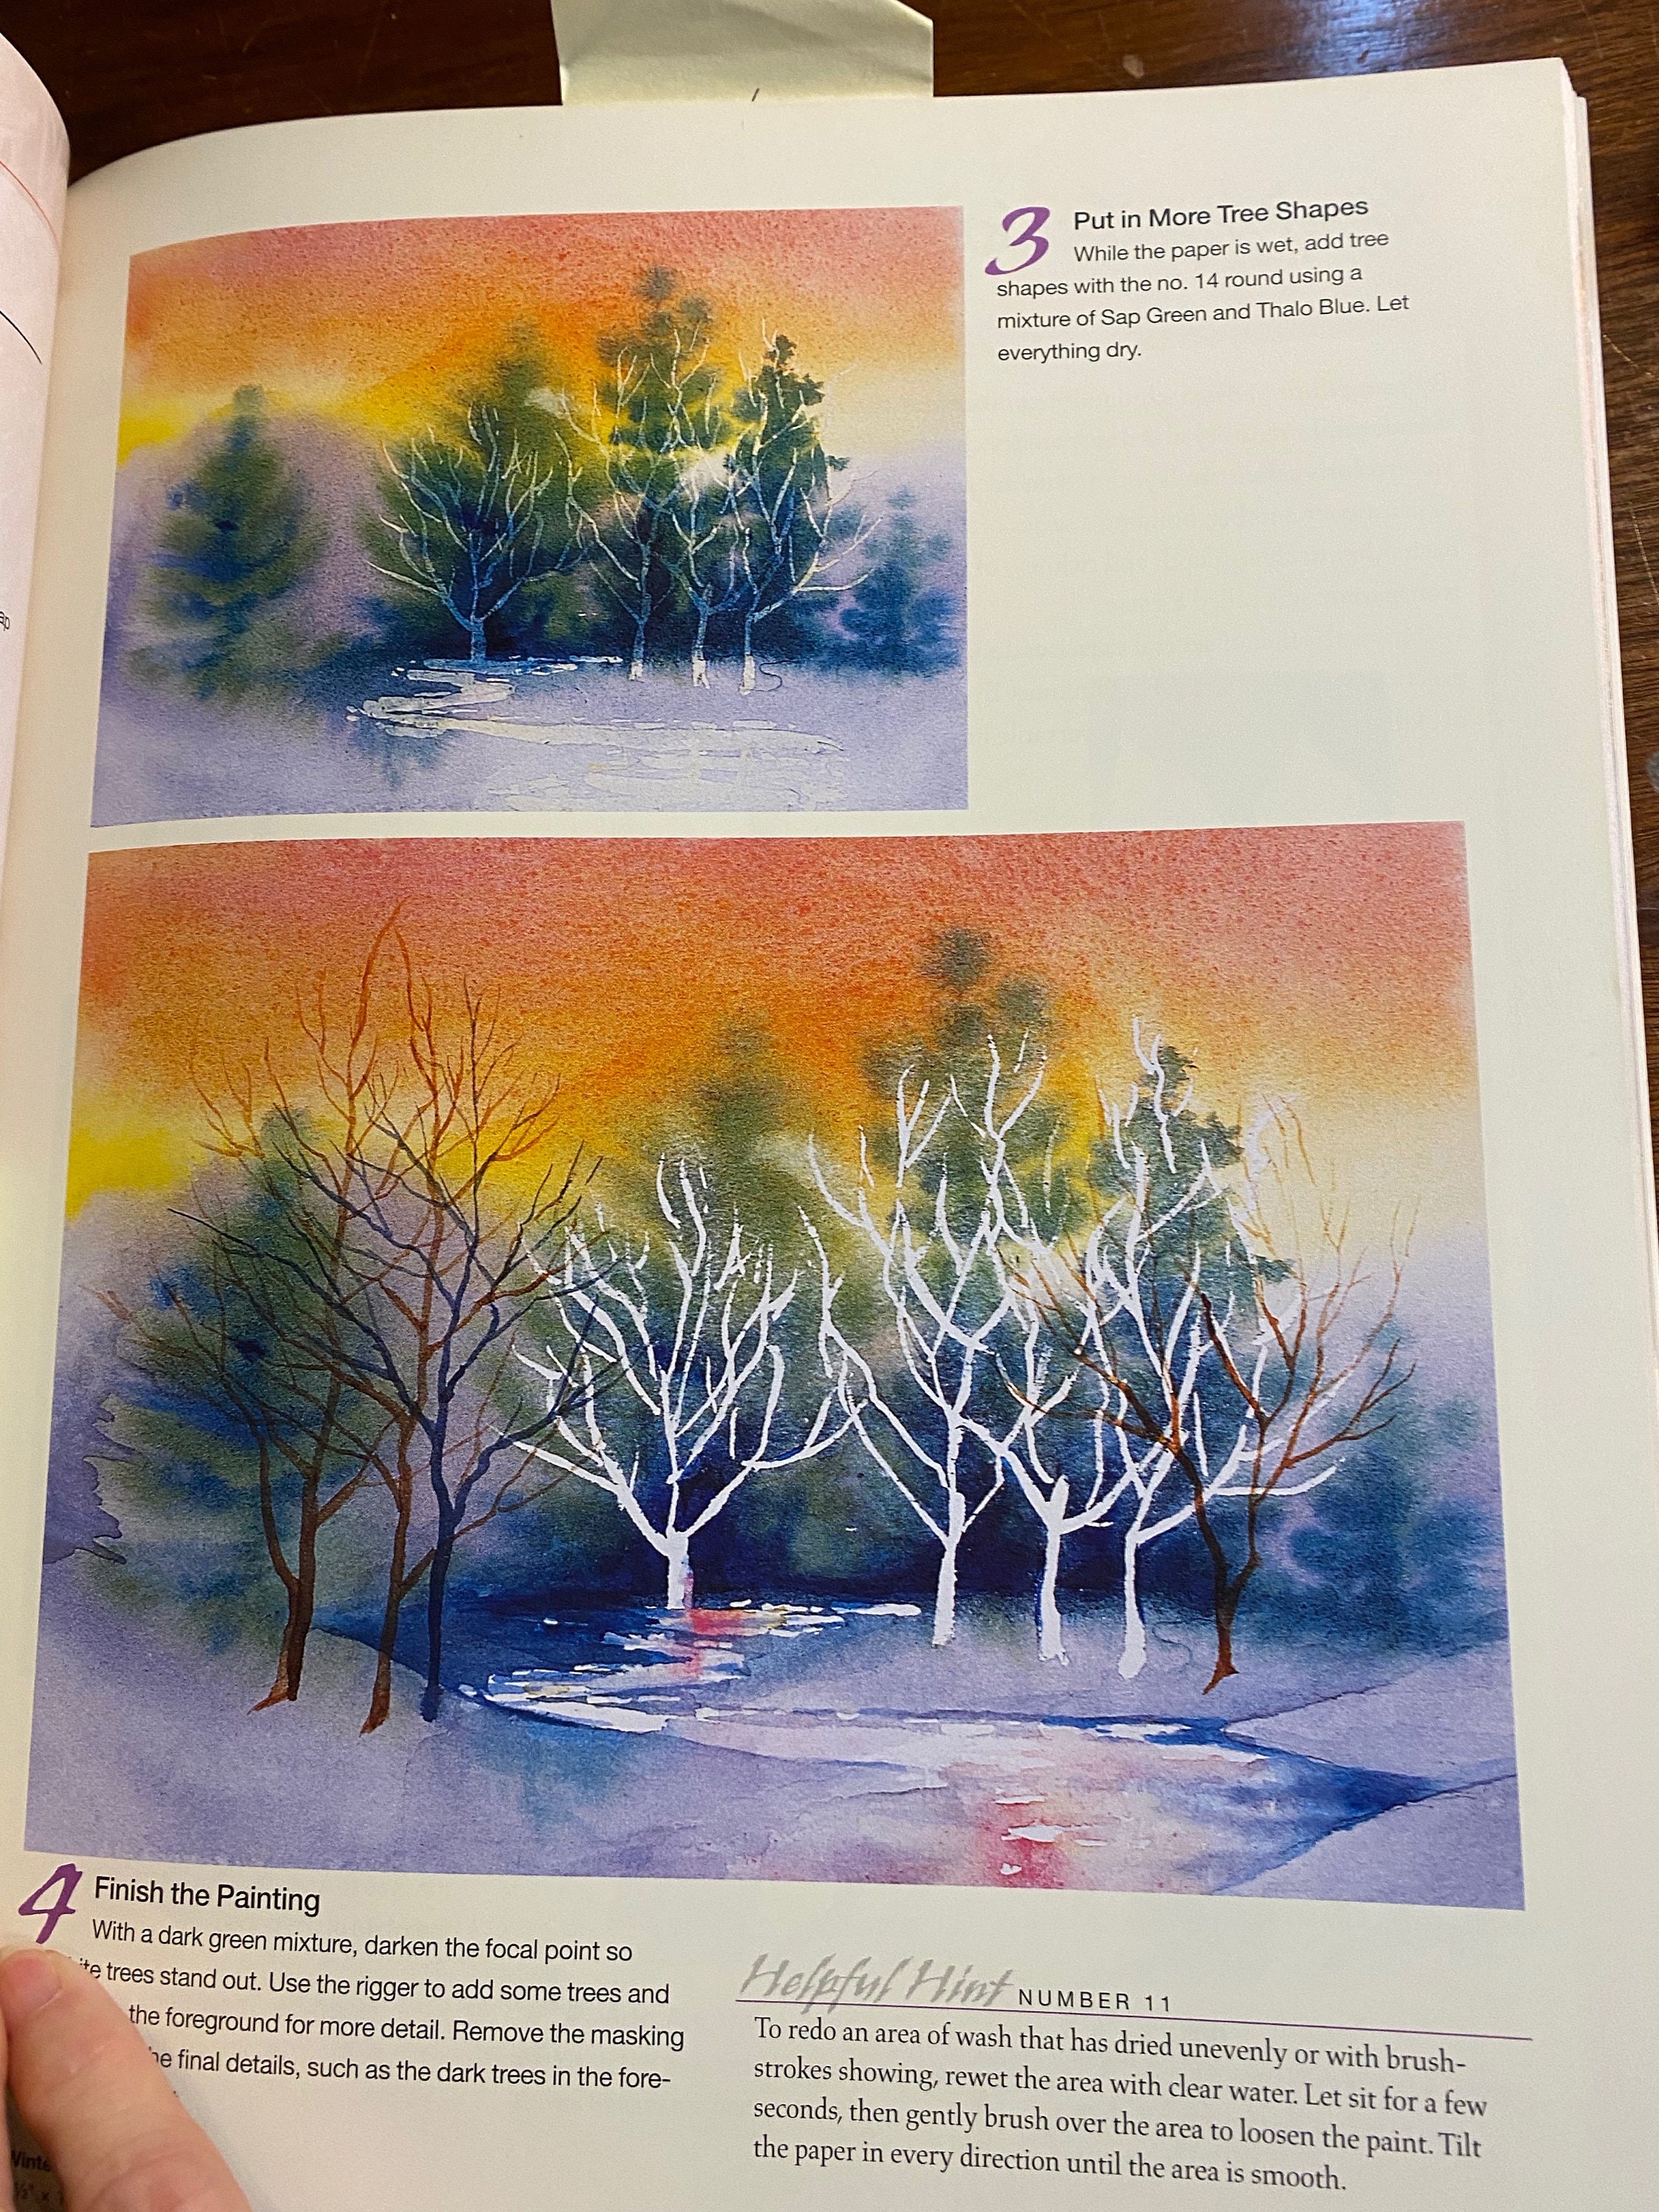 Exploring Watercolor : Painting Exercises / Techniques With Watermedia  Elizabeth Groves 2012 Methods /, Guide Painting Skills 